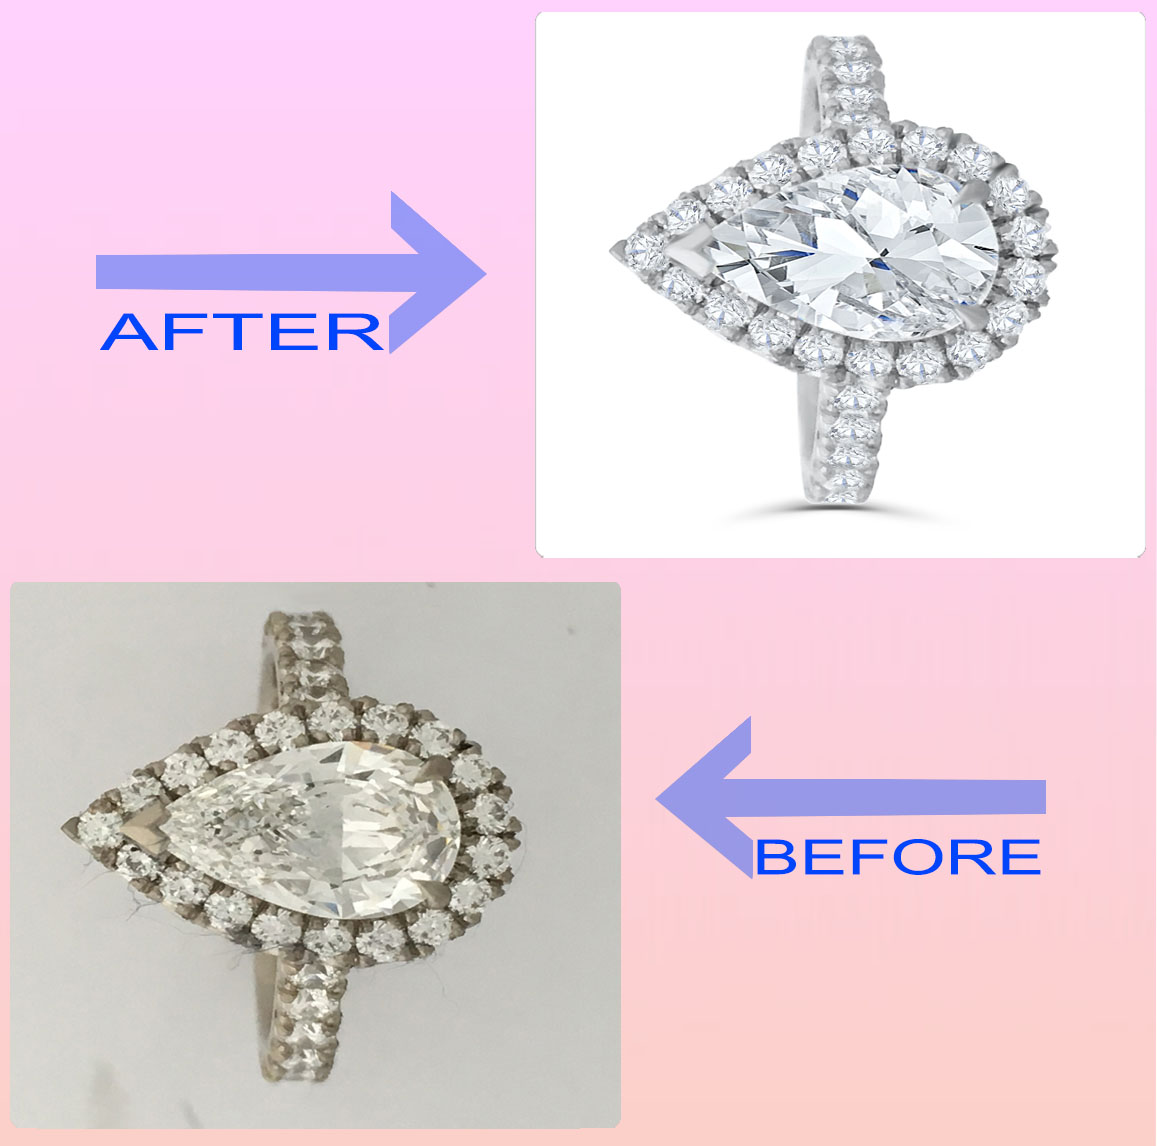 Experience the Glamour: Witness Our Hi-End Jewelry Retouching Service! 💍✨#JewelryRetouching #BeforeAfter #Transformation #JewelryPixel #RetouchingMagic #BeforeAfter #JewelryDesign #PhotoEditing #BacktoBack #23point5EP9 #jewelry